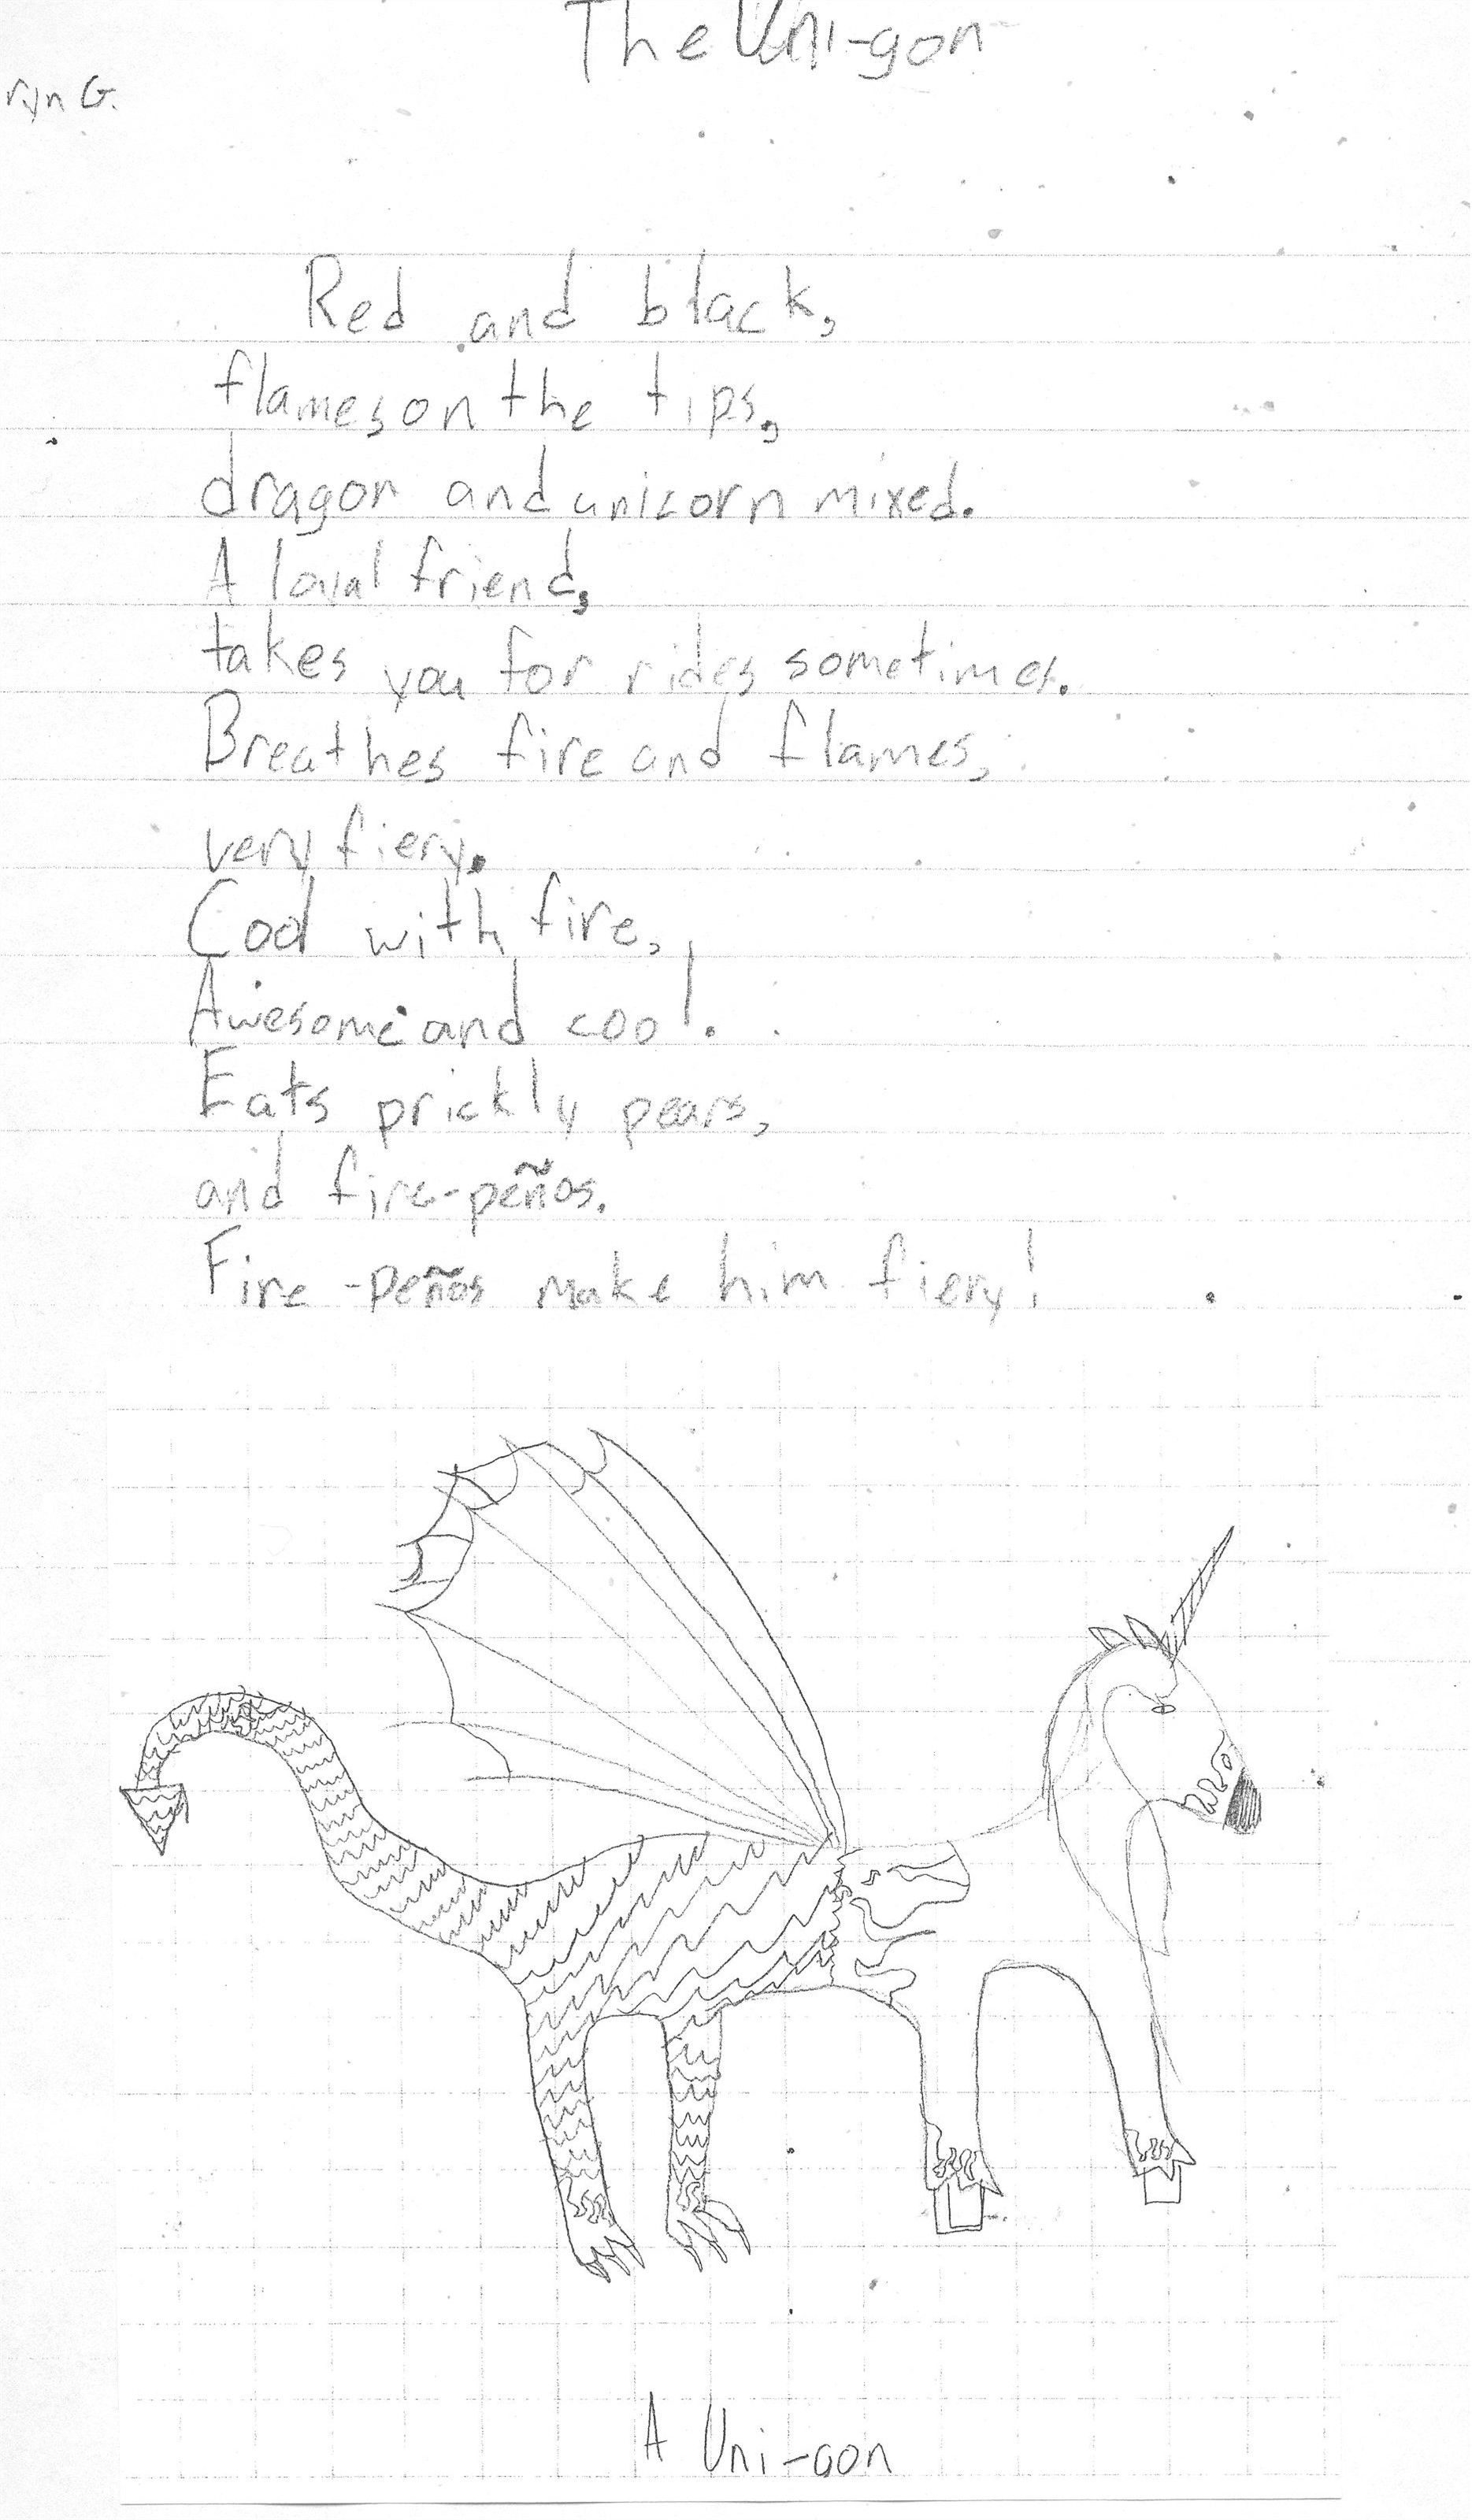 Poems about and illustrations of imaginary animals.